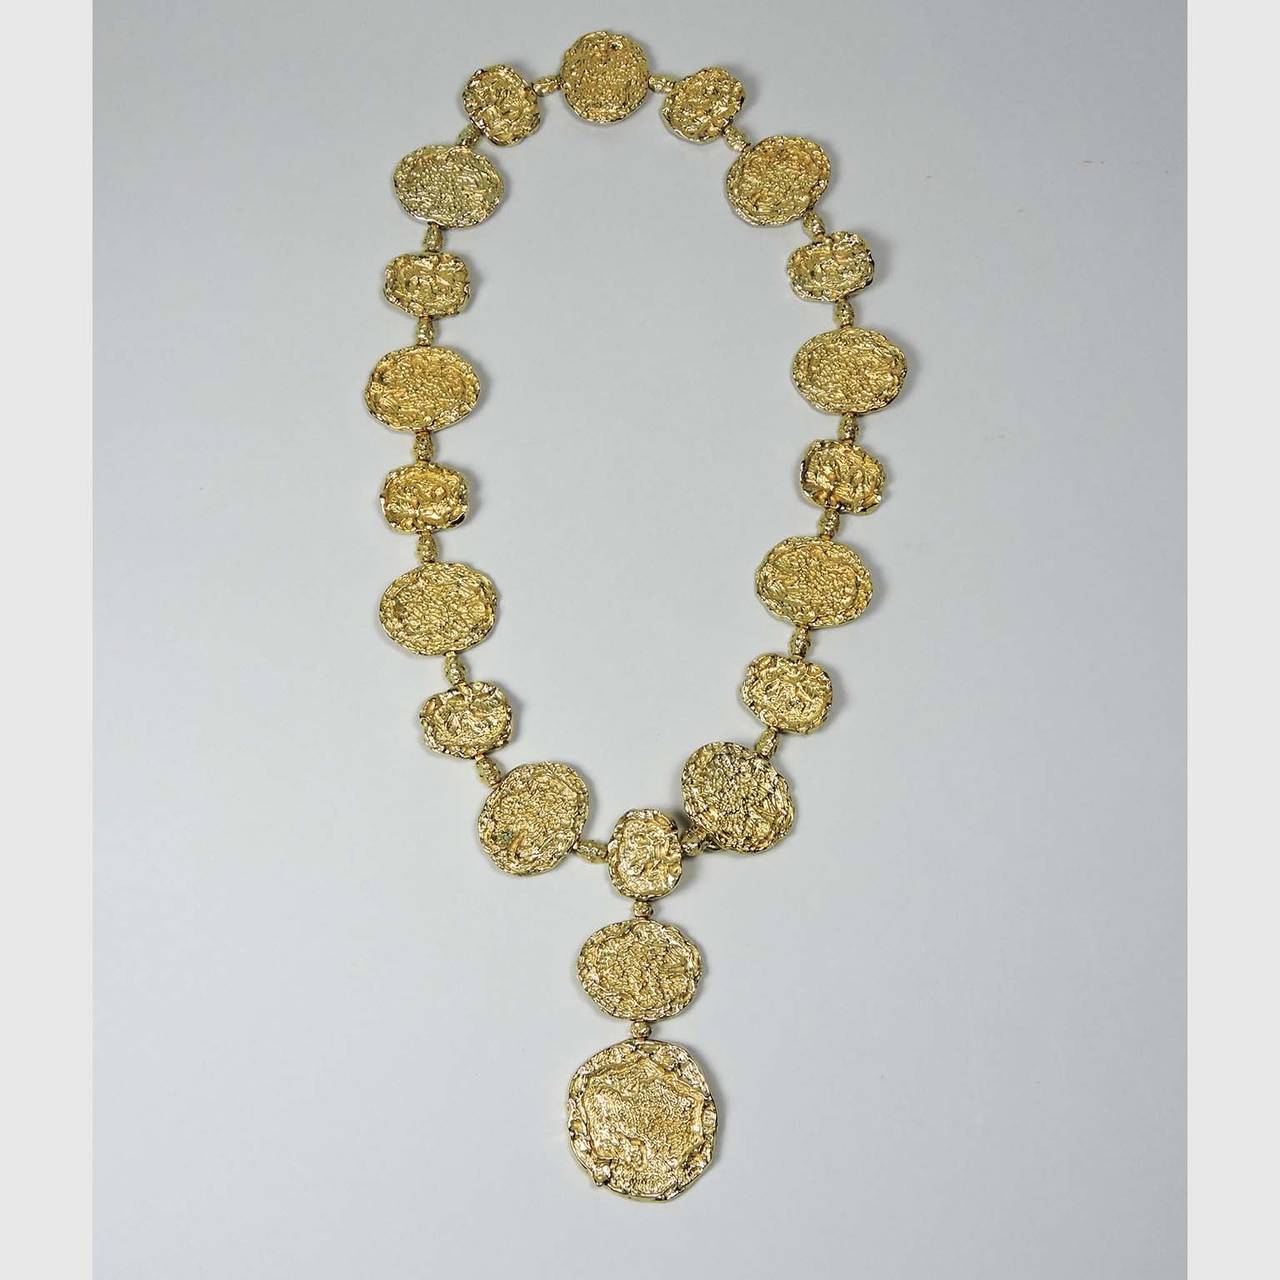 Cartier Gilt Silver Vermeil Necklace-Belt, circa 1970; 
marked Cartier, Sterling; Comprised of 19 silver gilt textured links with a 4” pendant drop 
Length: 29.5”

Note: A popular fashion accessory of the 1970’s, Jackie O’ was known to have